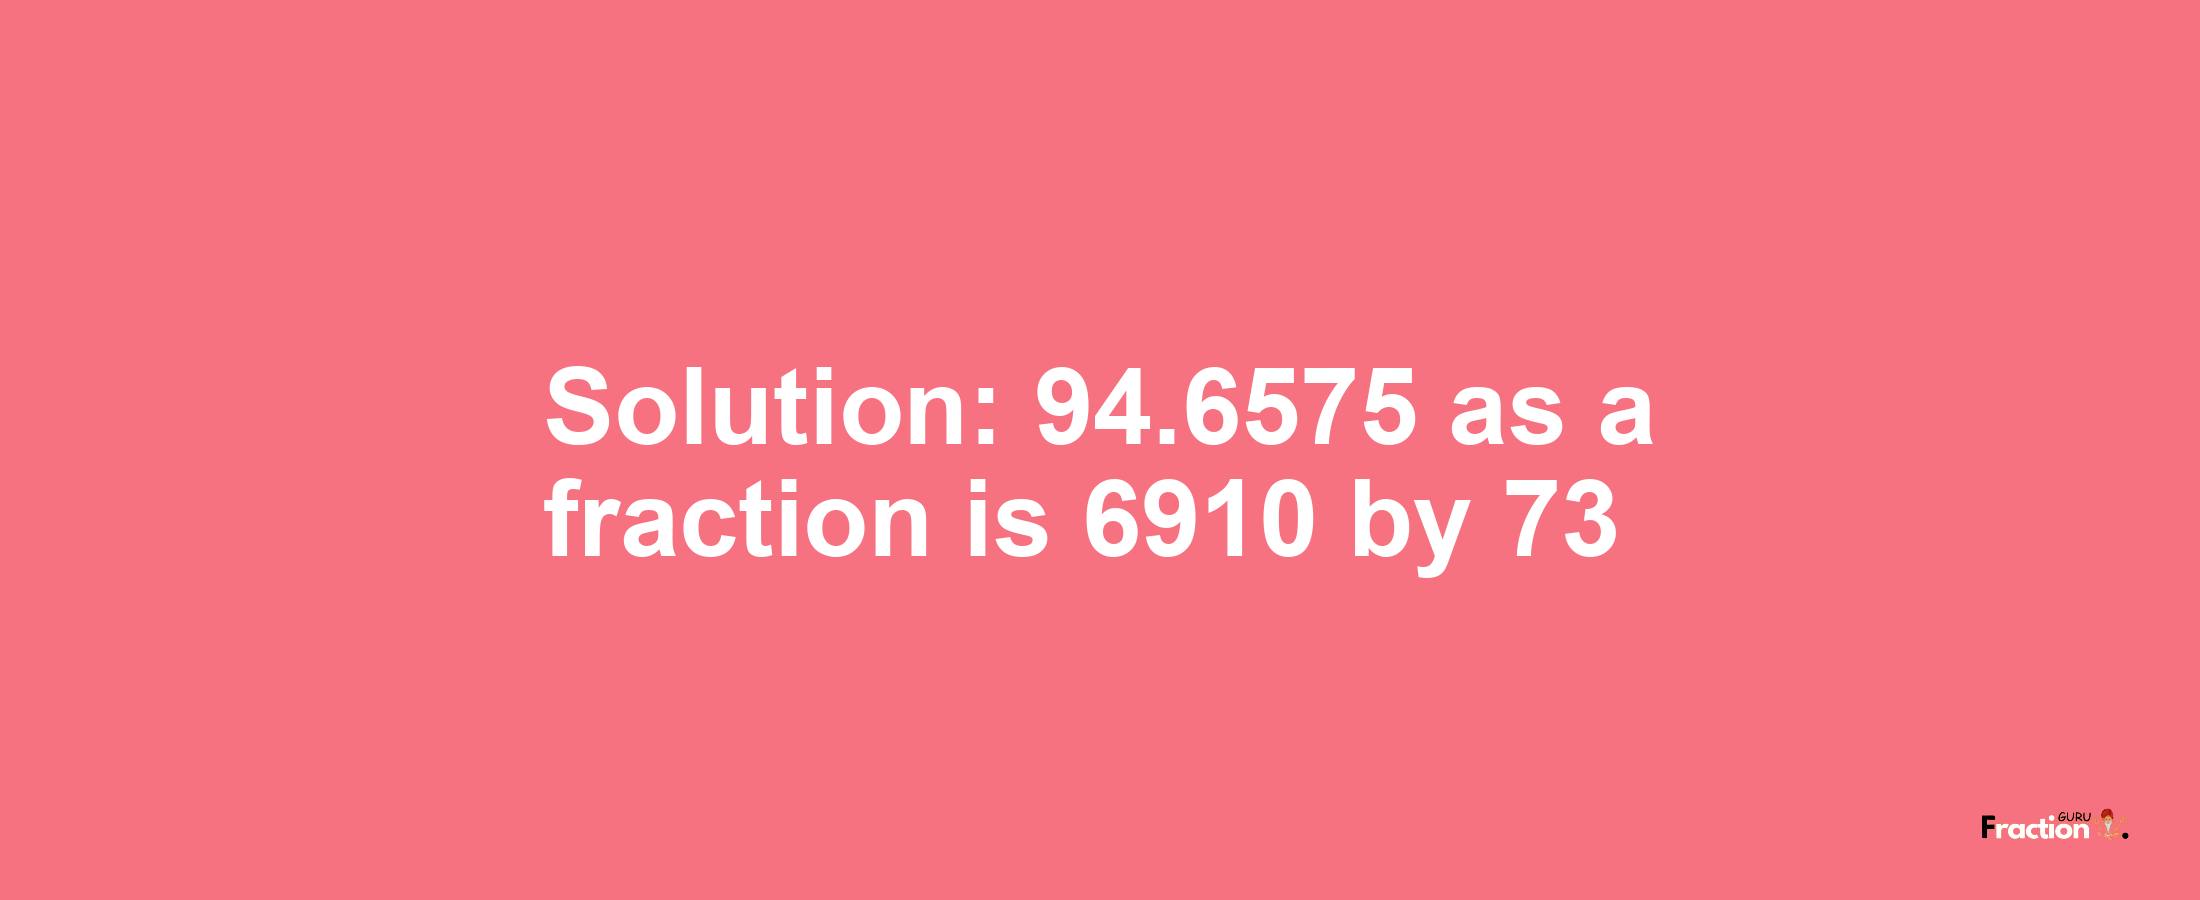 Solution:94.6575 as a fraction is 6910/73